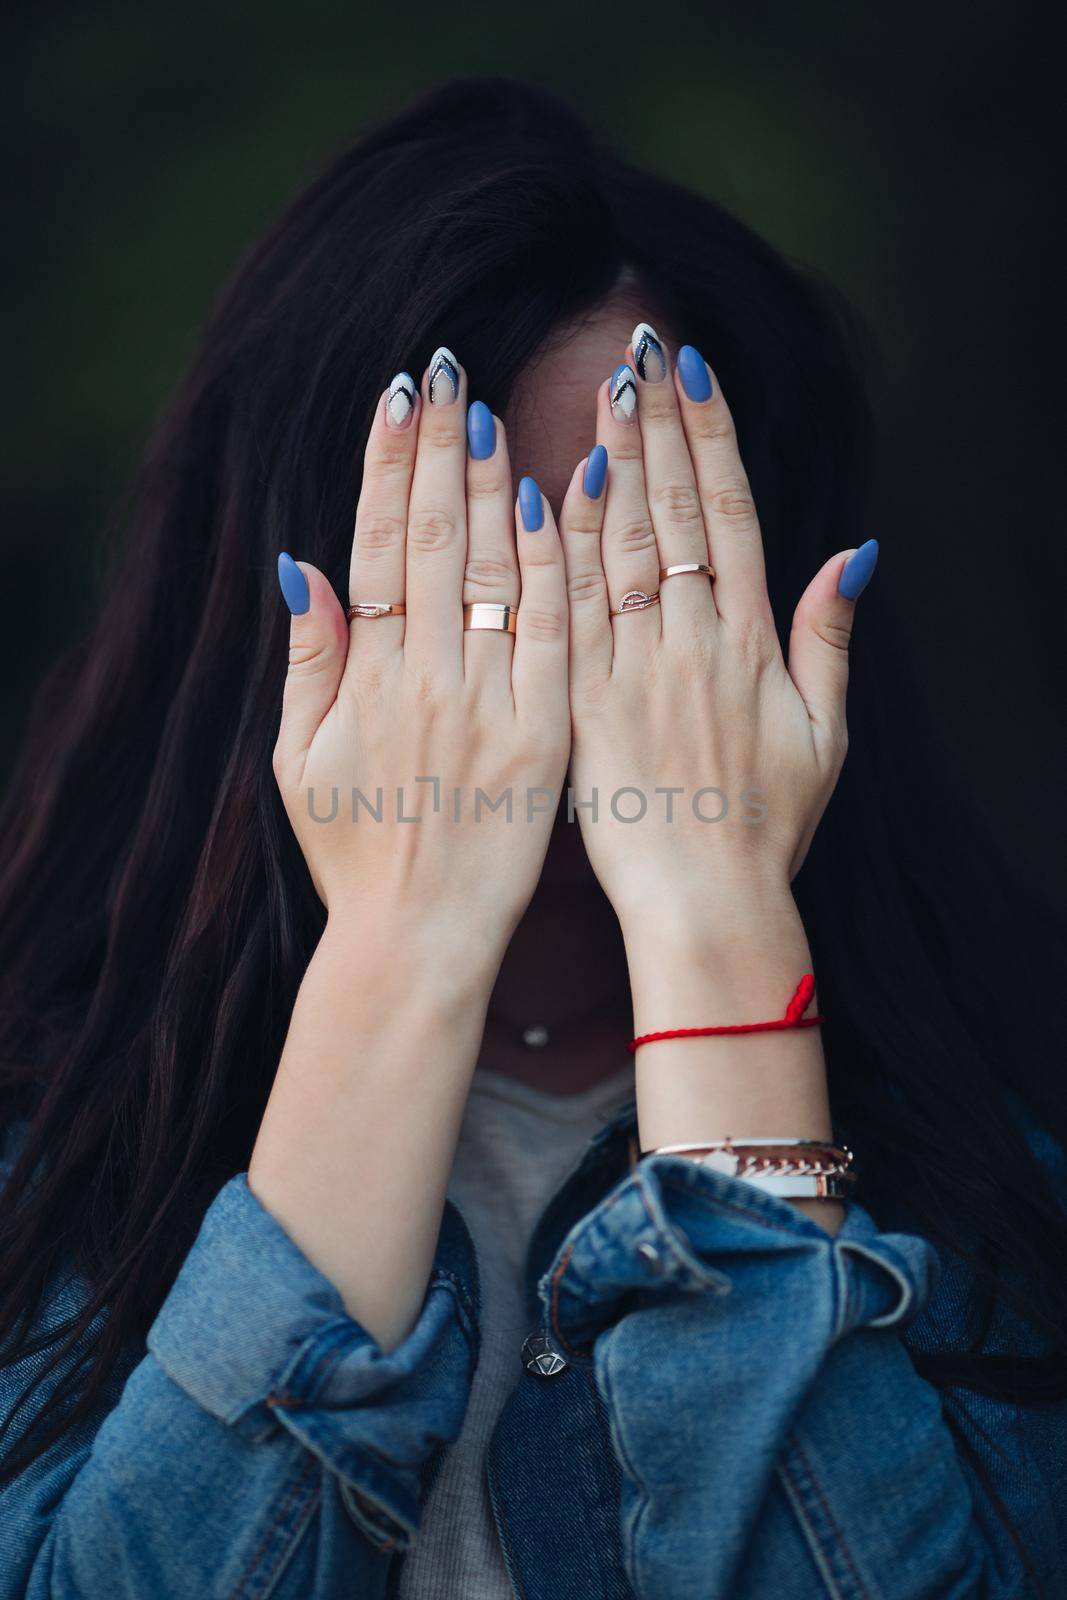 Crop of female hands with elegant blue and white manicure before head. Girl with gorgeous dark long hair hiding face by arms. Woman in jeans jacket holding palms together and wearing rings on fingers.